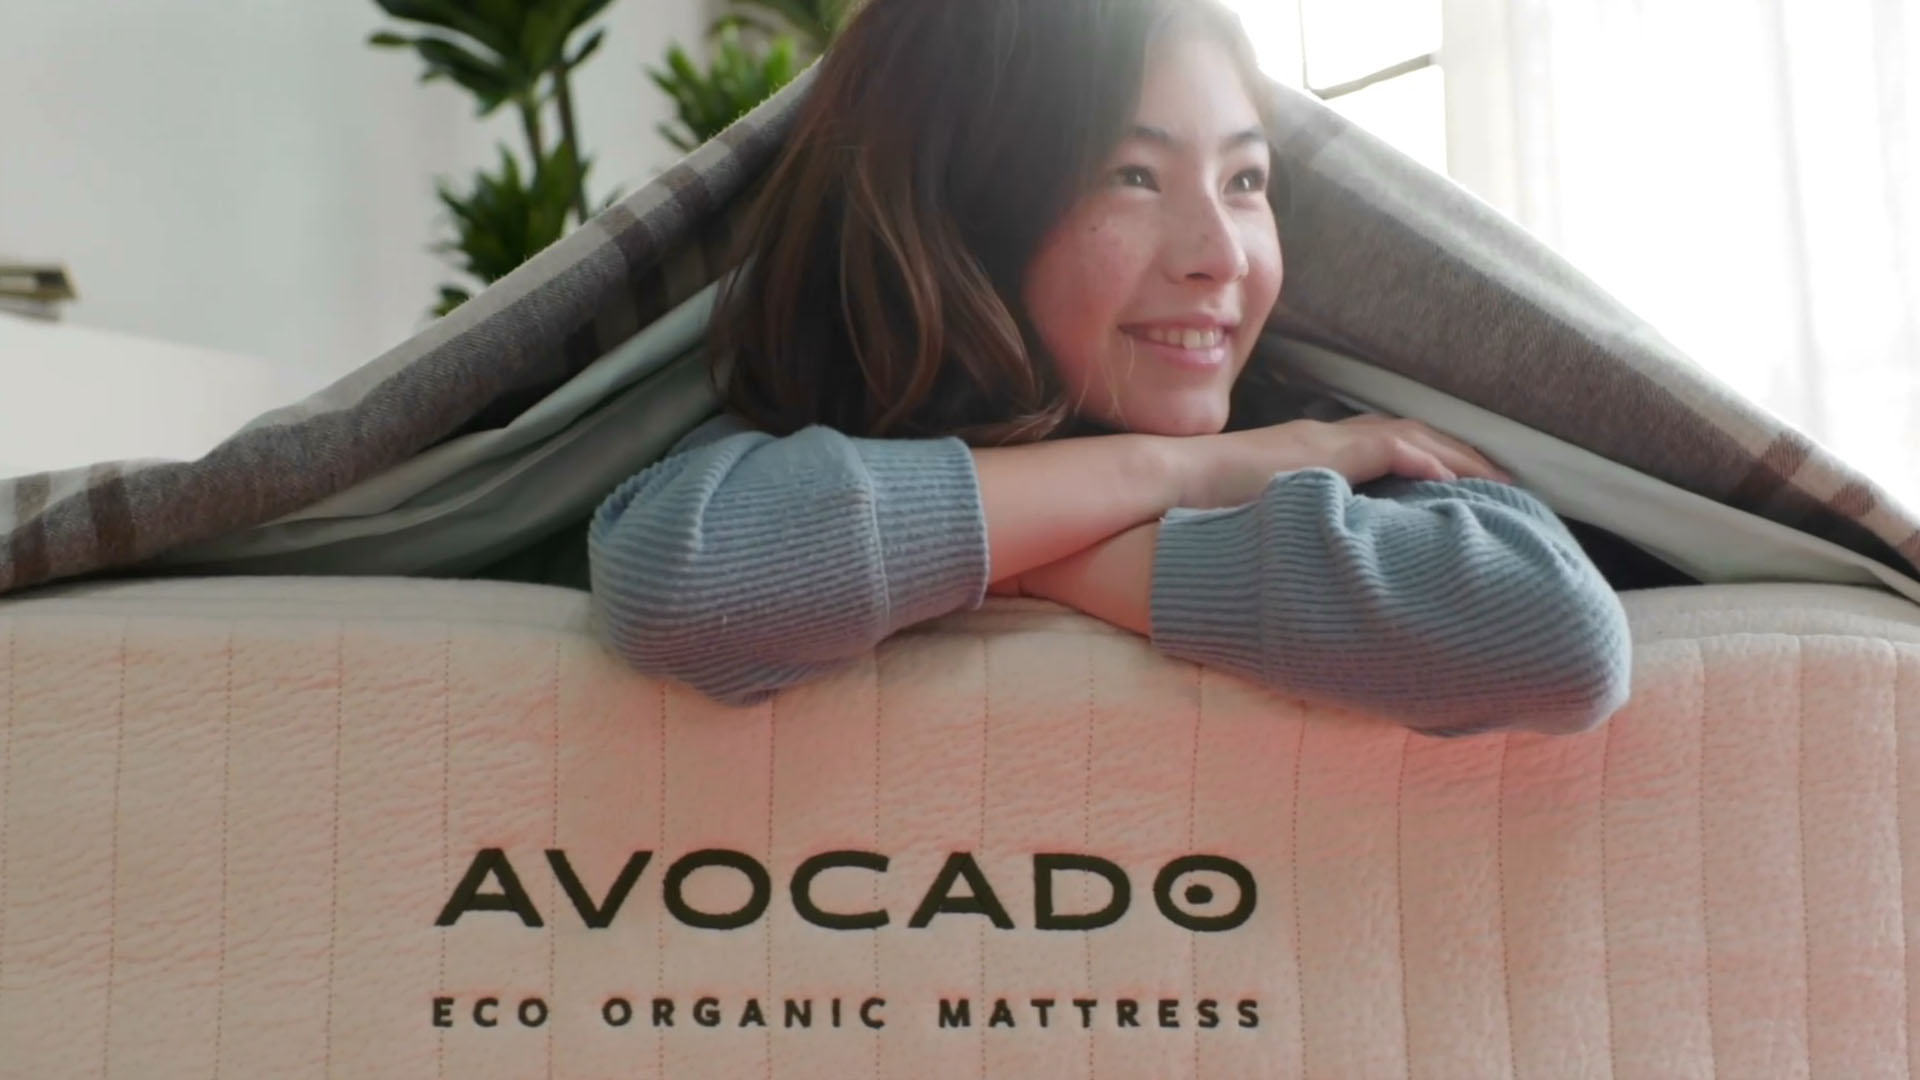 Who sells Avocado mattress near me in Gainesville